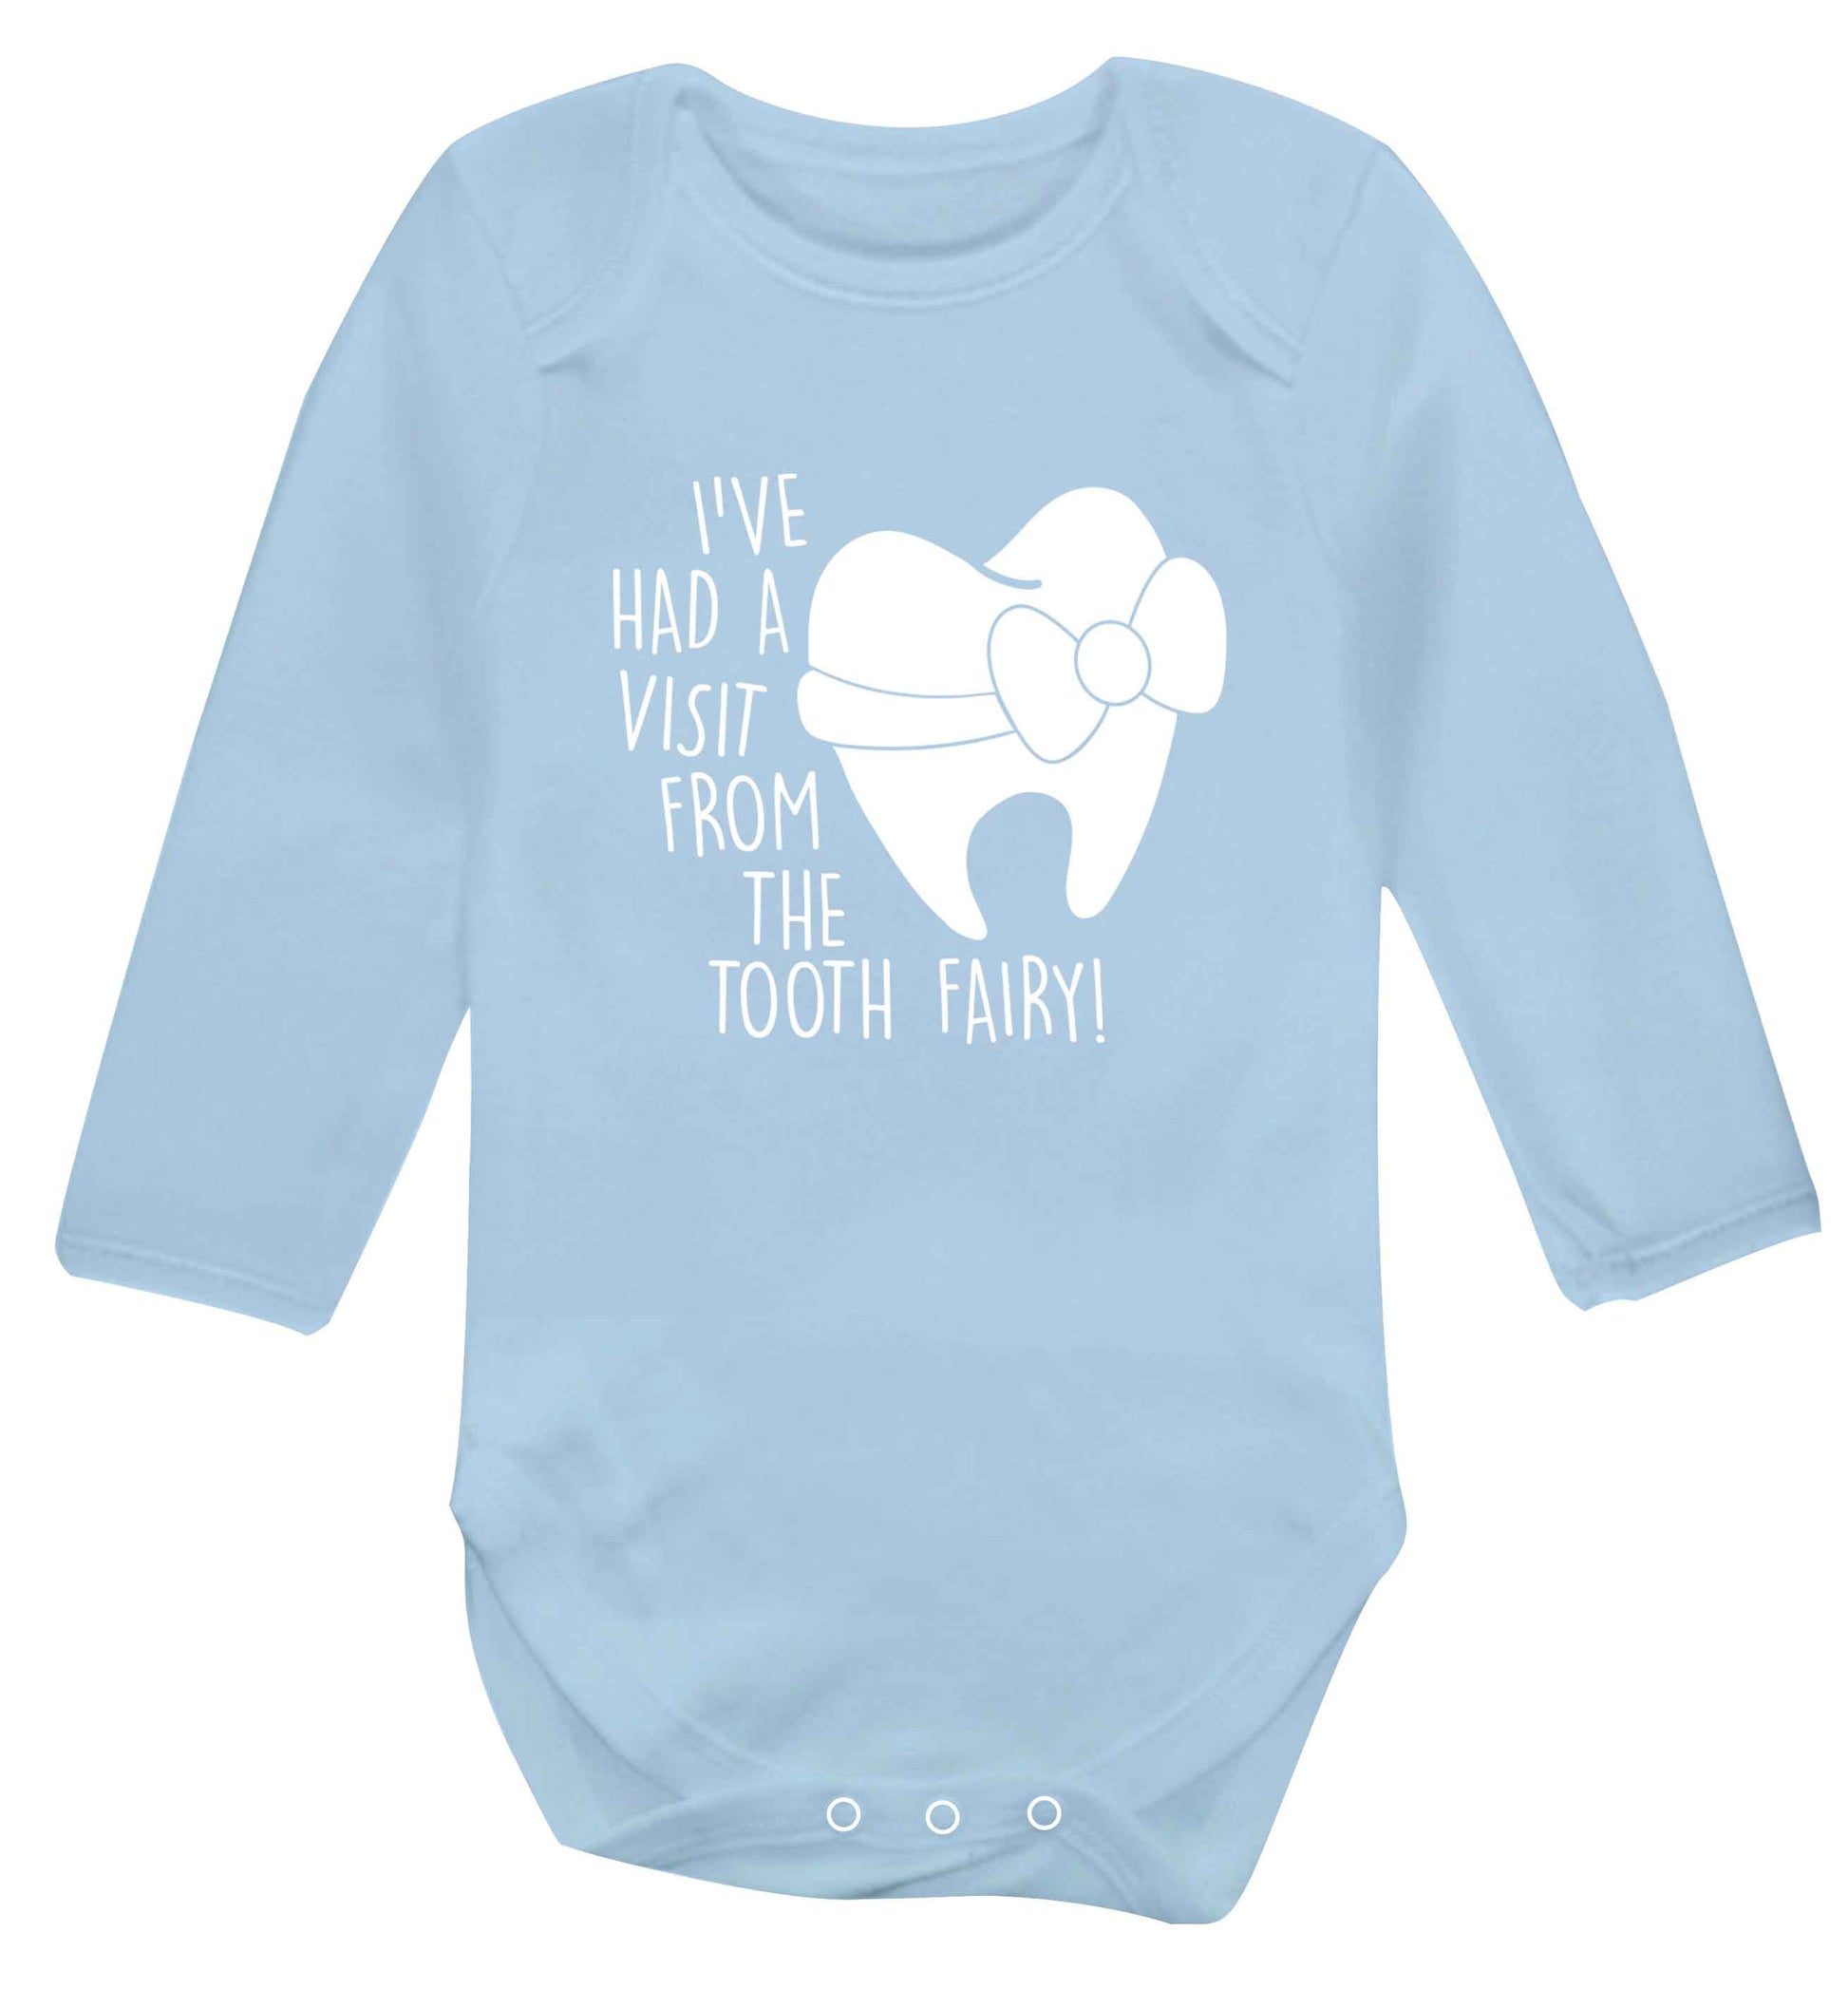 Visit From Tooth Fairy baby vest long sleeved pale blue 6-12 months